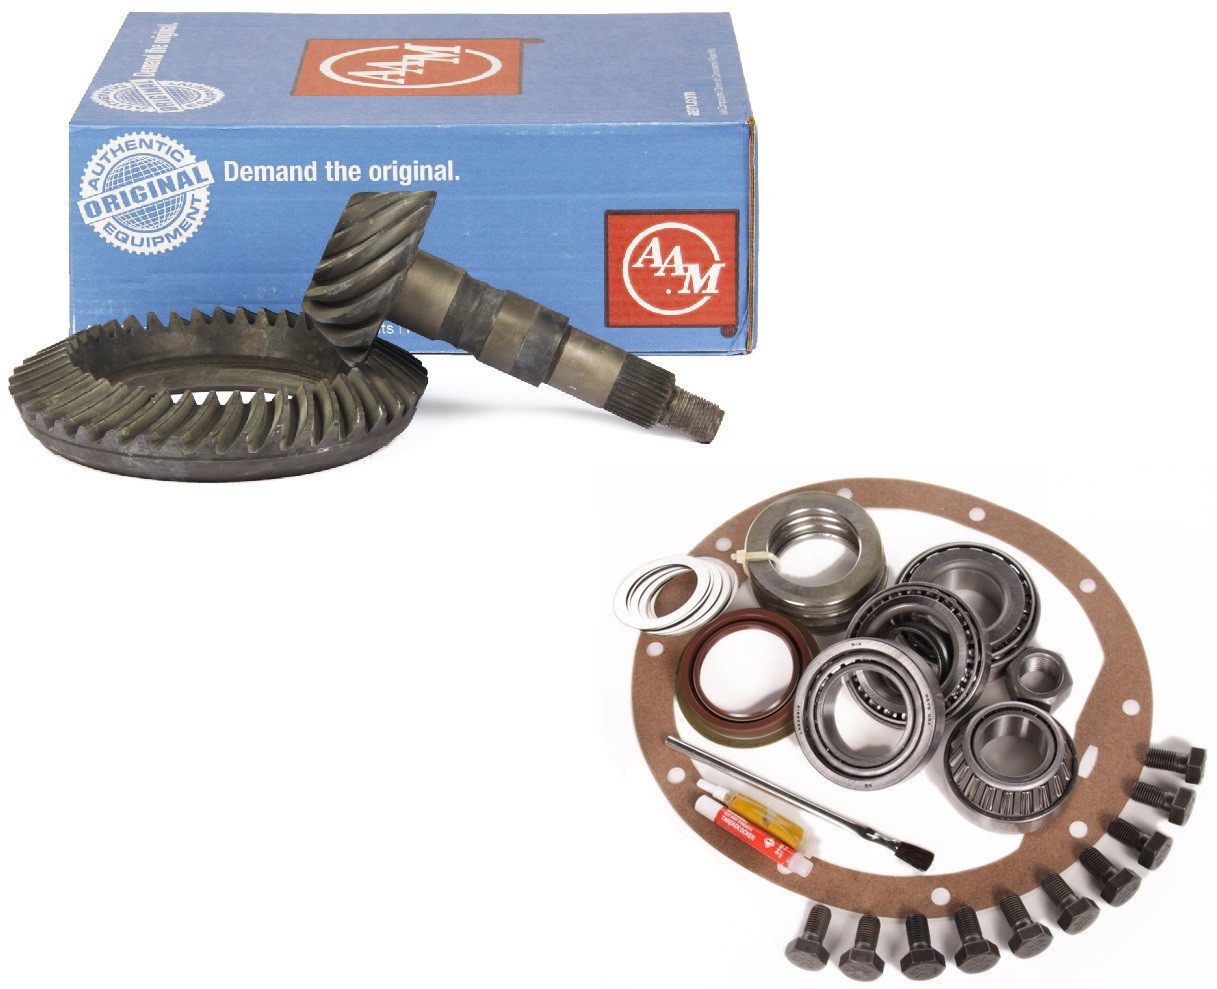 Revolution Gear GM9.5-410L GM 12 Bolt 9.5 4.10 Ring & Pinion for 2014 and Newer 